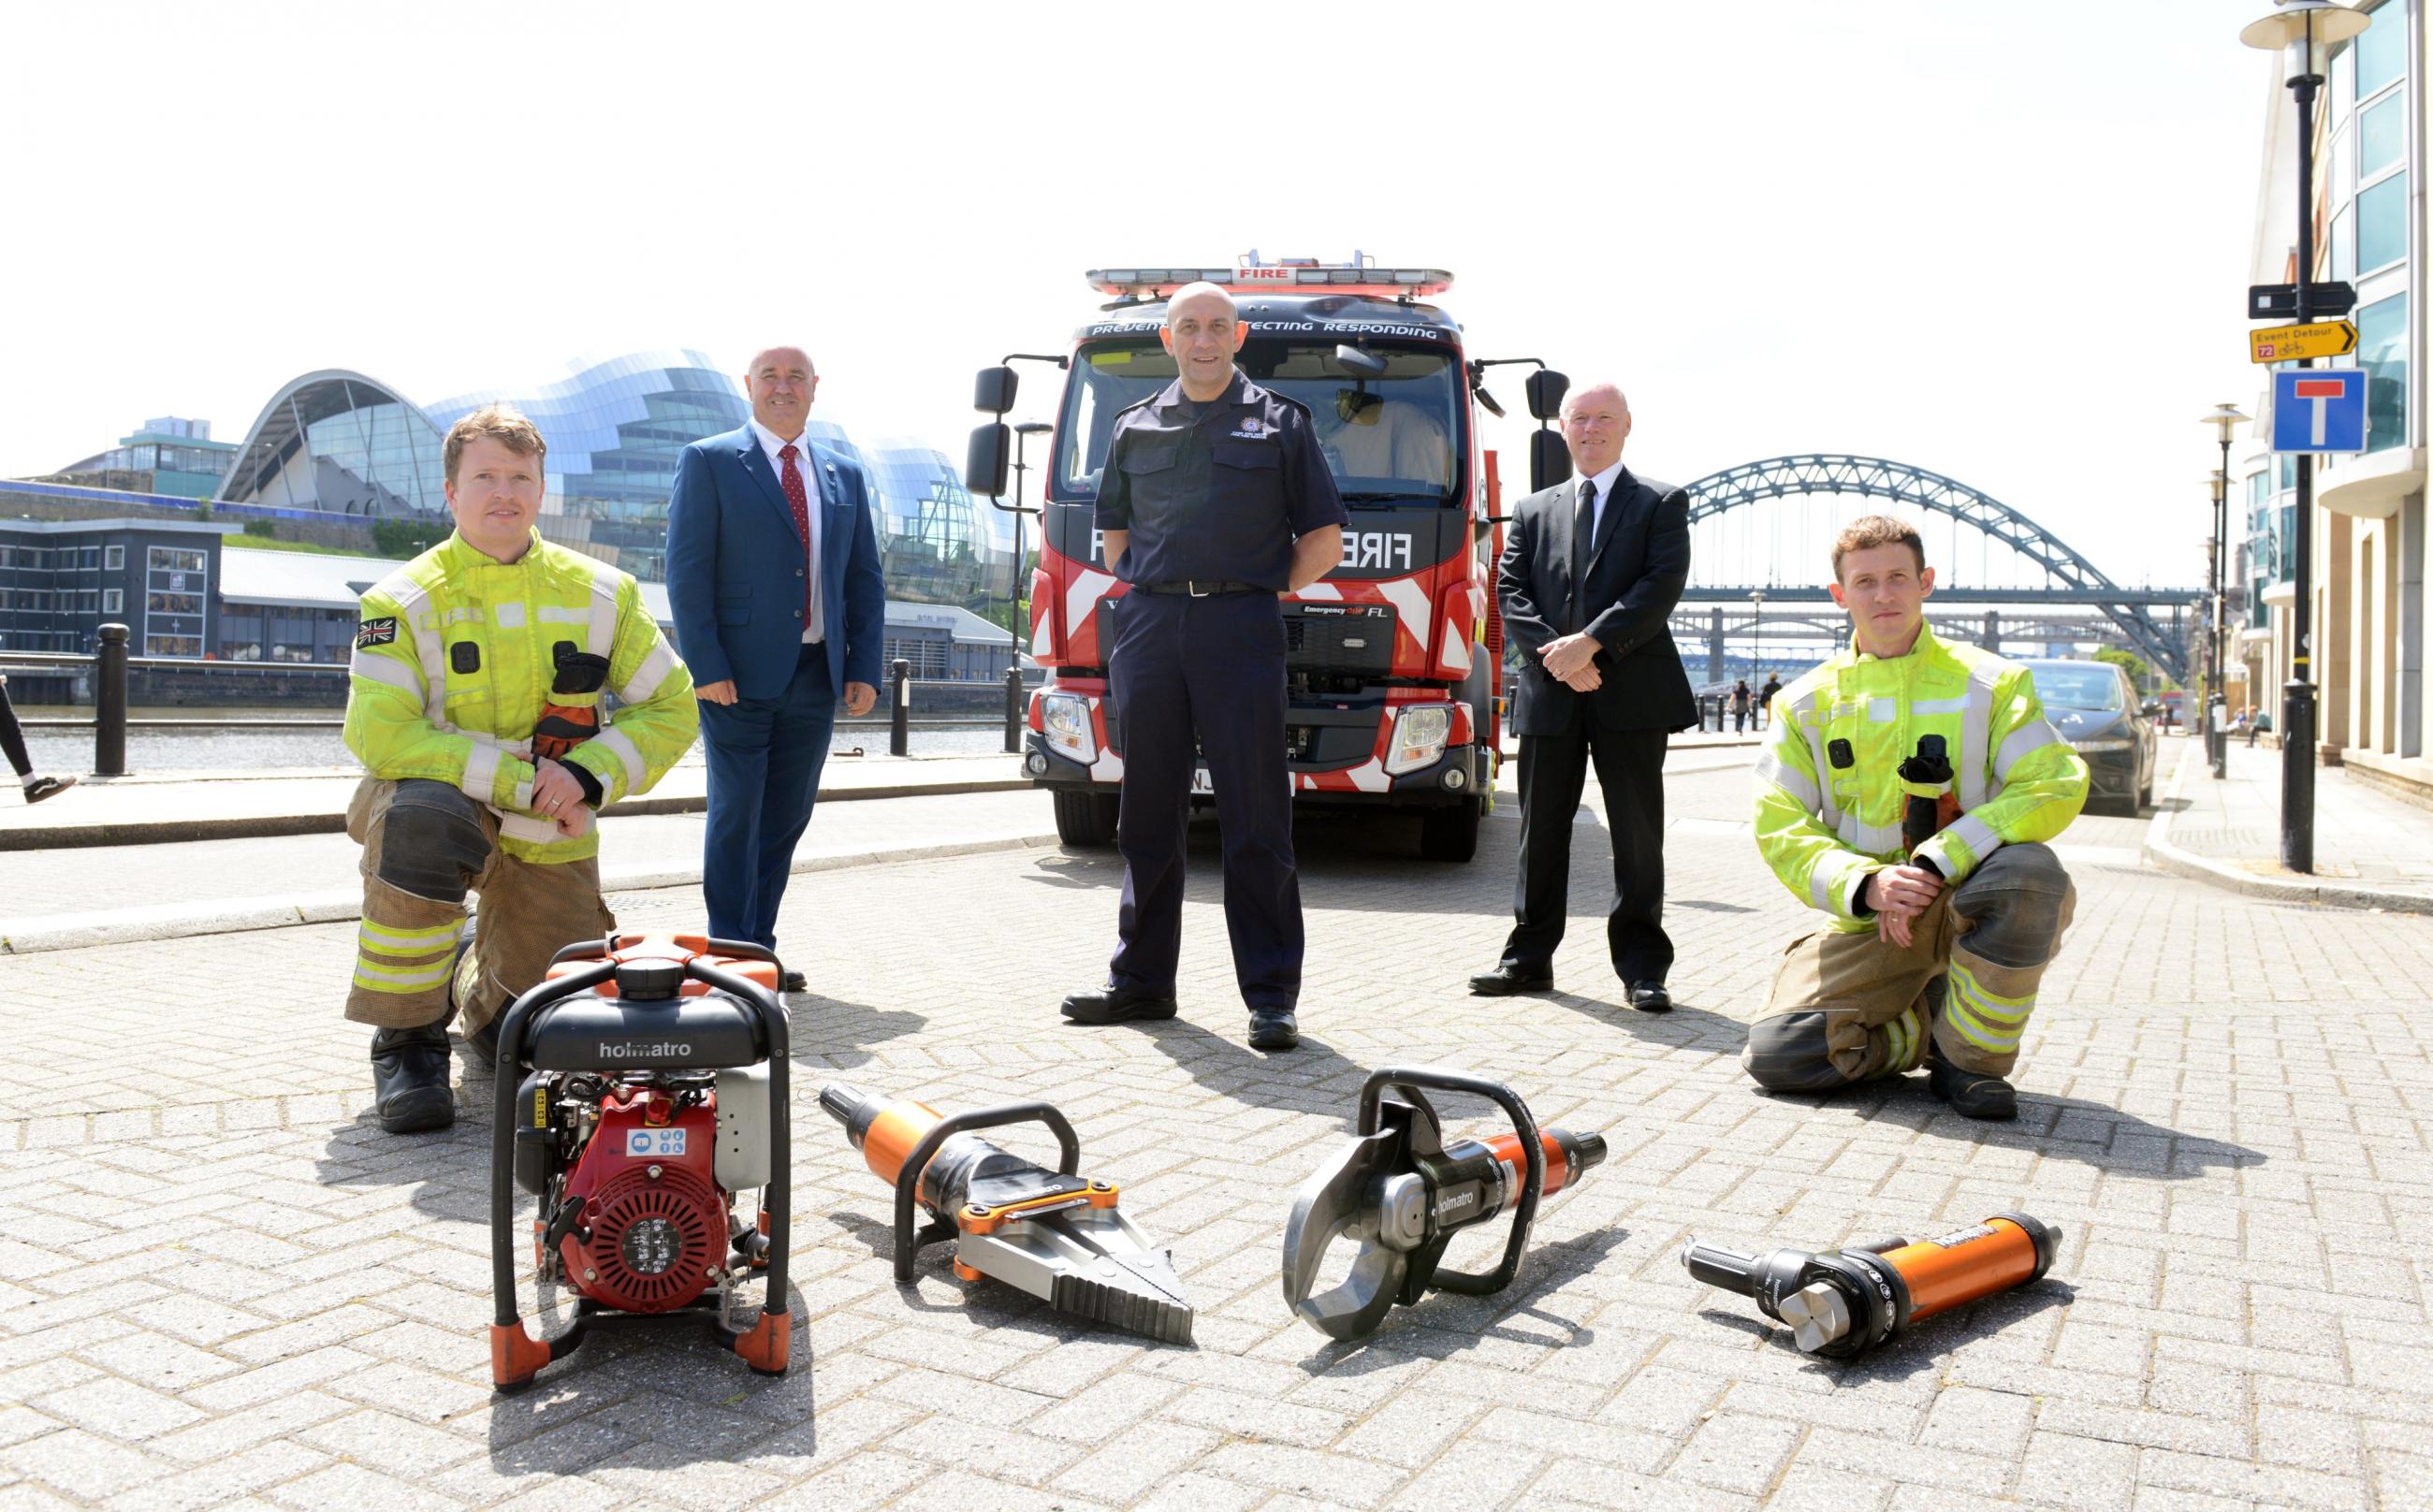 Councillor Ged Bell of Newcastle City Council; DCFO Peter Heath of TWFRS; and Gateshead Councillor Kevin Dodds, a member of the Tyne and Wear Fire and Rescue Authority; with TWFRS firefighters Philip Johnson & Scott Elliott on the Newcastle Quayside